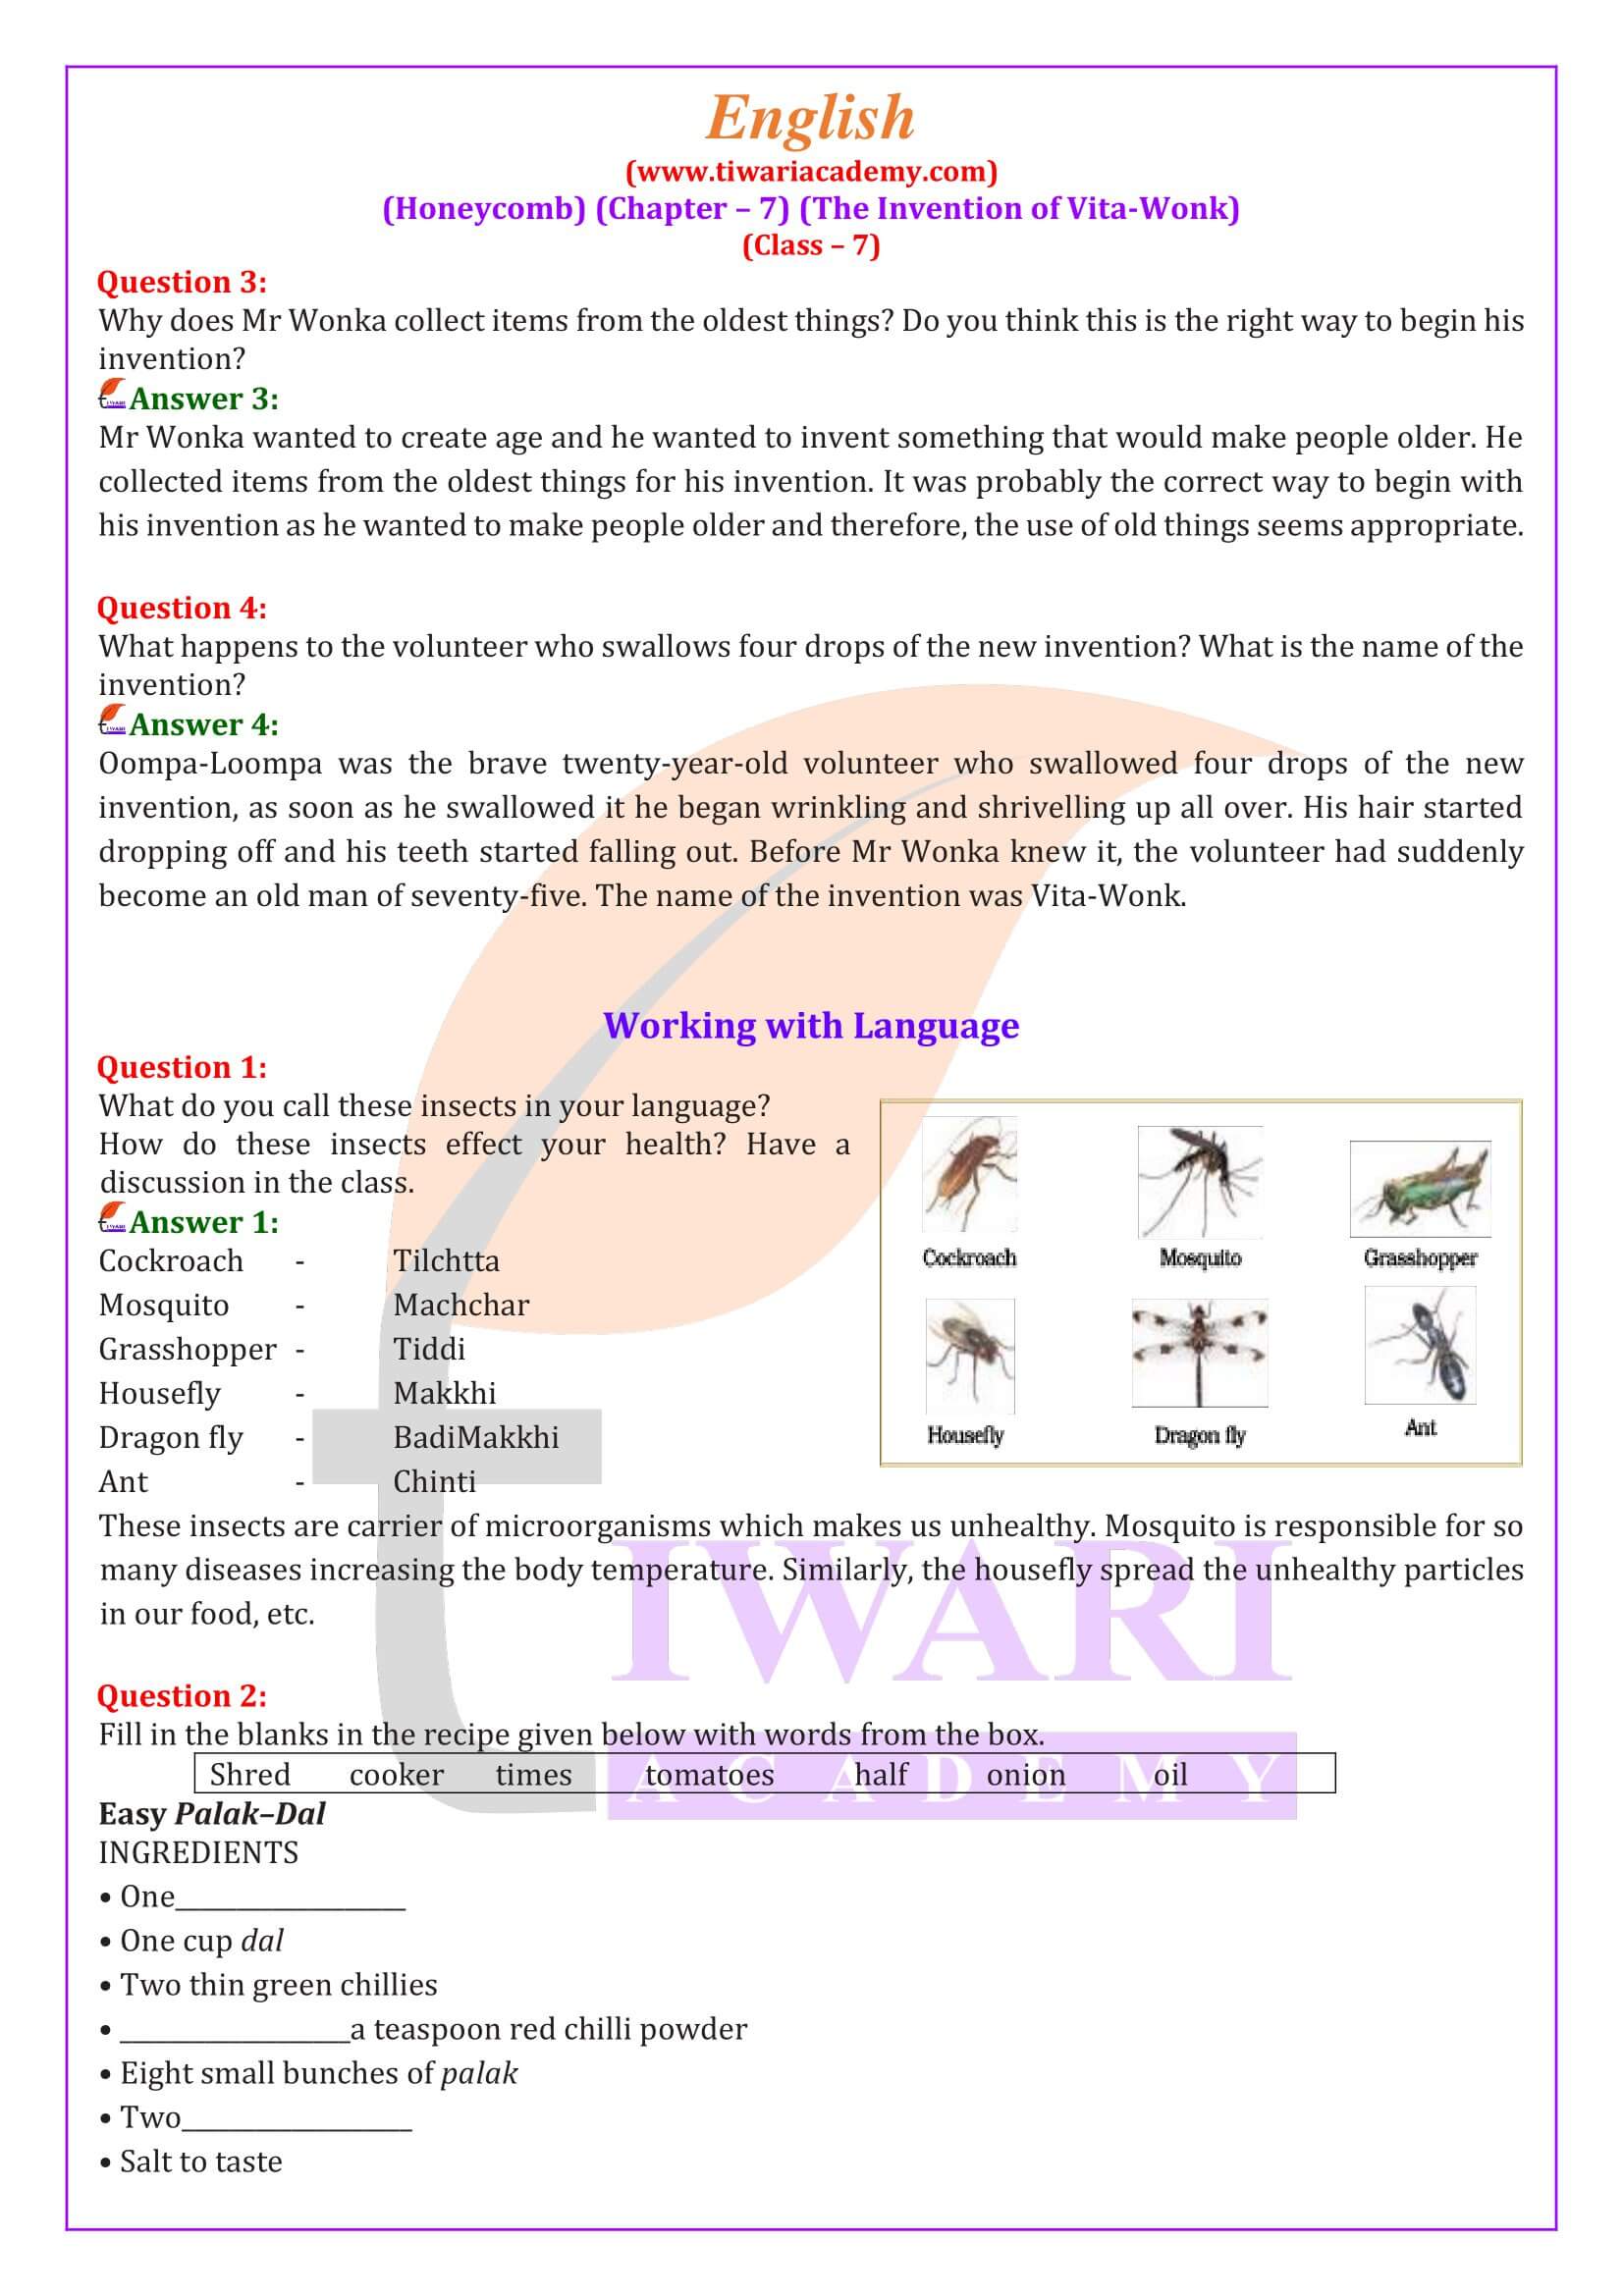 Class 7 English Honeycomb Chapter 7 The Invention of Vita-Work